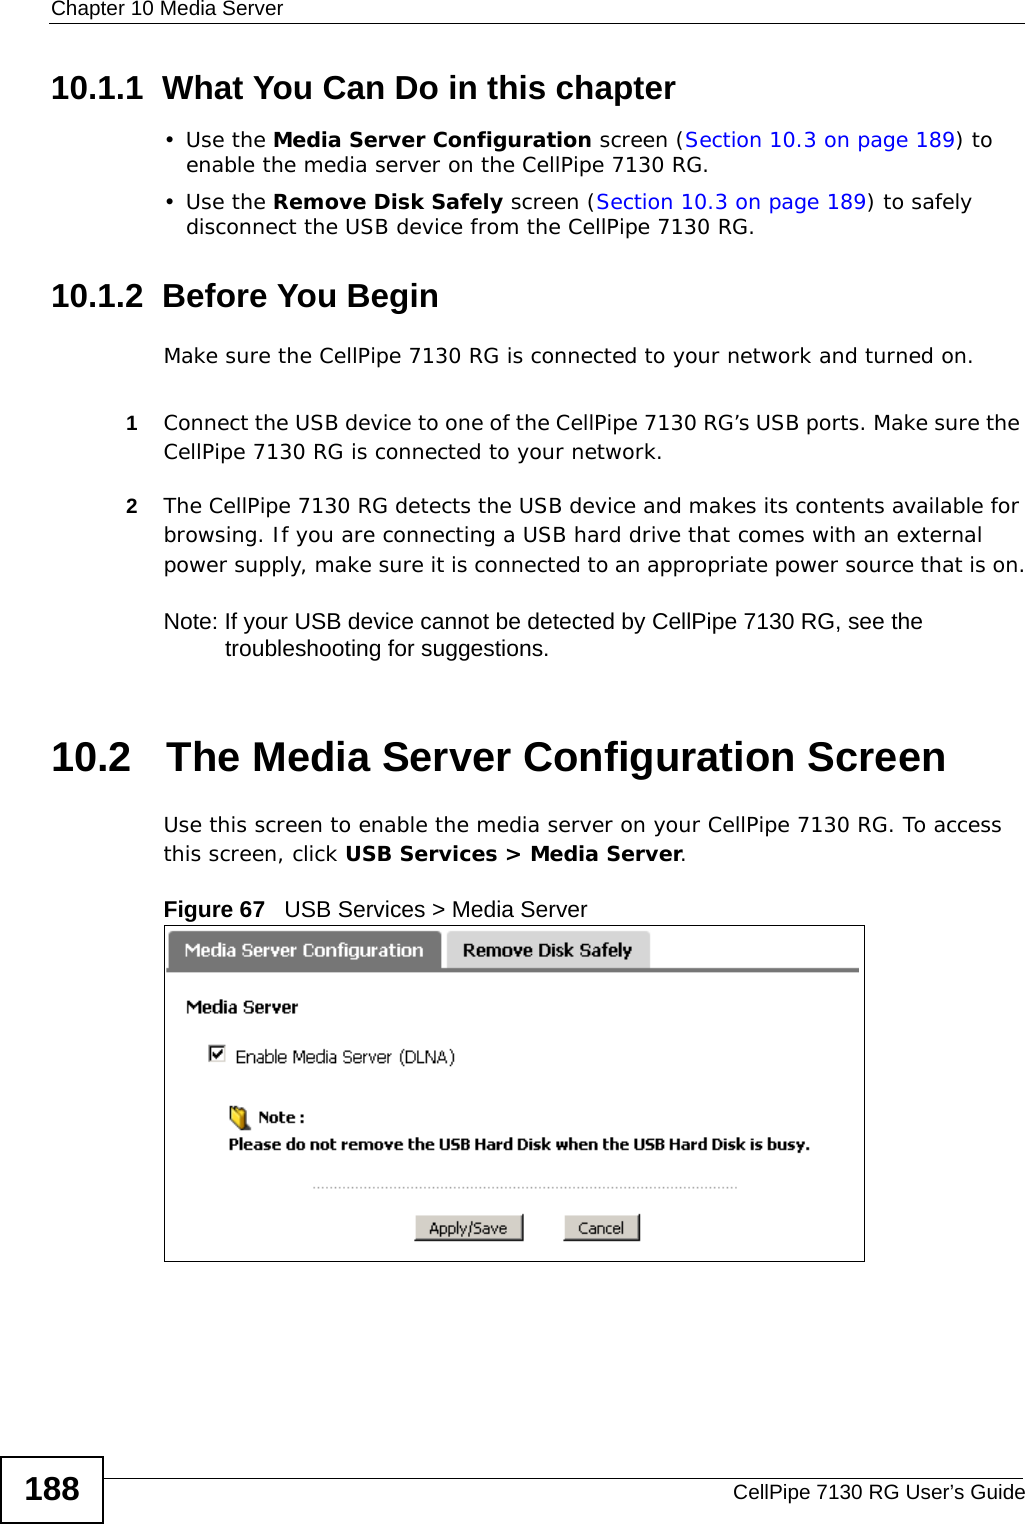 Chapter 10 Media ServerCellPipe 7130 RG User’s Guide18810.1.1  What You Can Do in this chapter•Use the Media Server Configuration screen (Section 10.3 on page 189) to enable the media server on the CellPipe 7130 RG.•Use the Remove Disk Safely screen (Section 10.3 on page 189) to safely disconnect the USB device from the CellPipe 7130 RG.10.1.2  Before You BeginMake sure the CellPipe 7130 RG is connected to your network and turned on.1Connect the USB device to one of the CellPipe 7130 RG’s USB ports. Make sure the CellPipe 7130 RG is connected to your network.2The CellPipe 7130 RG detects the USB device and makes its contents available for browsing. If you are connecting a USB hard drive that comes with an external power supply, make sure it is connected to an appropriate power source that is on.Note: If your USB device cannot be detected by CellPipe 7130 RG, see the troubleshooting for suggestions. 10.2   The Media Server Configuration ScreenUse this screen to enable the media server on your CellPipe 7130 RG. To access this screen, click USB Services &gt; Media Server.Figure 67   USB Services &gt; Media Server